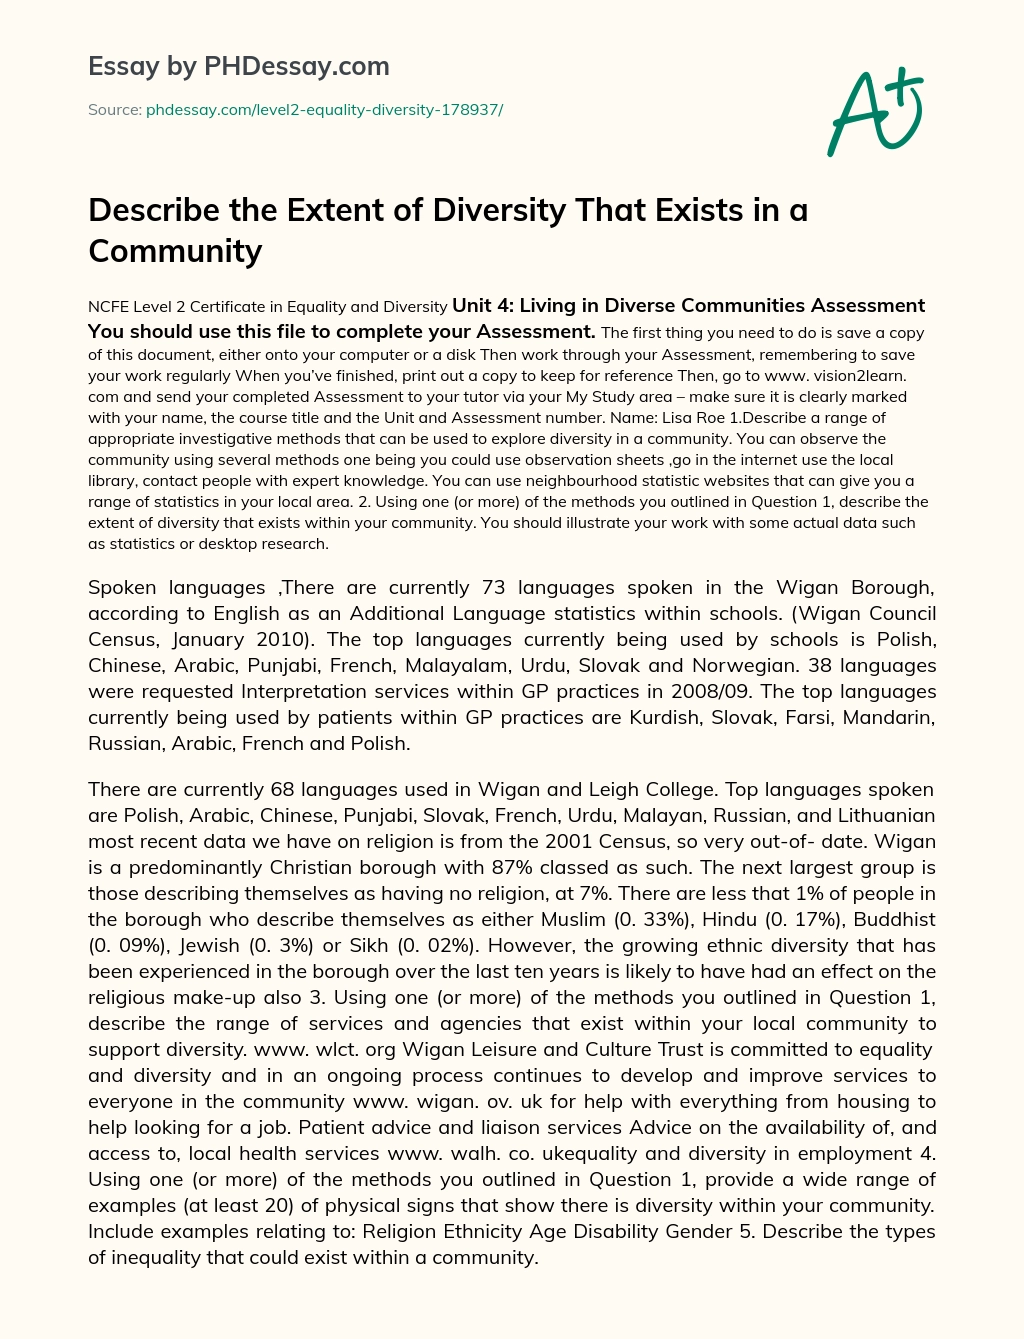 Describe the Extent of Diversity That Exists in a Community essay